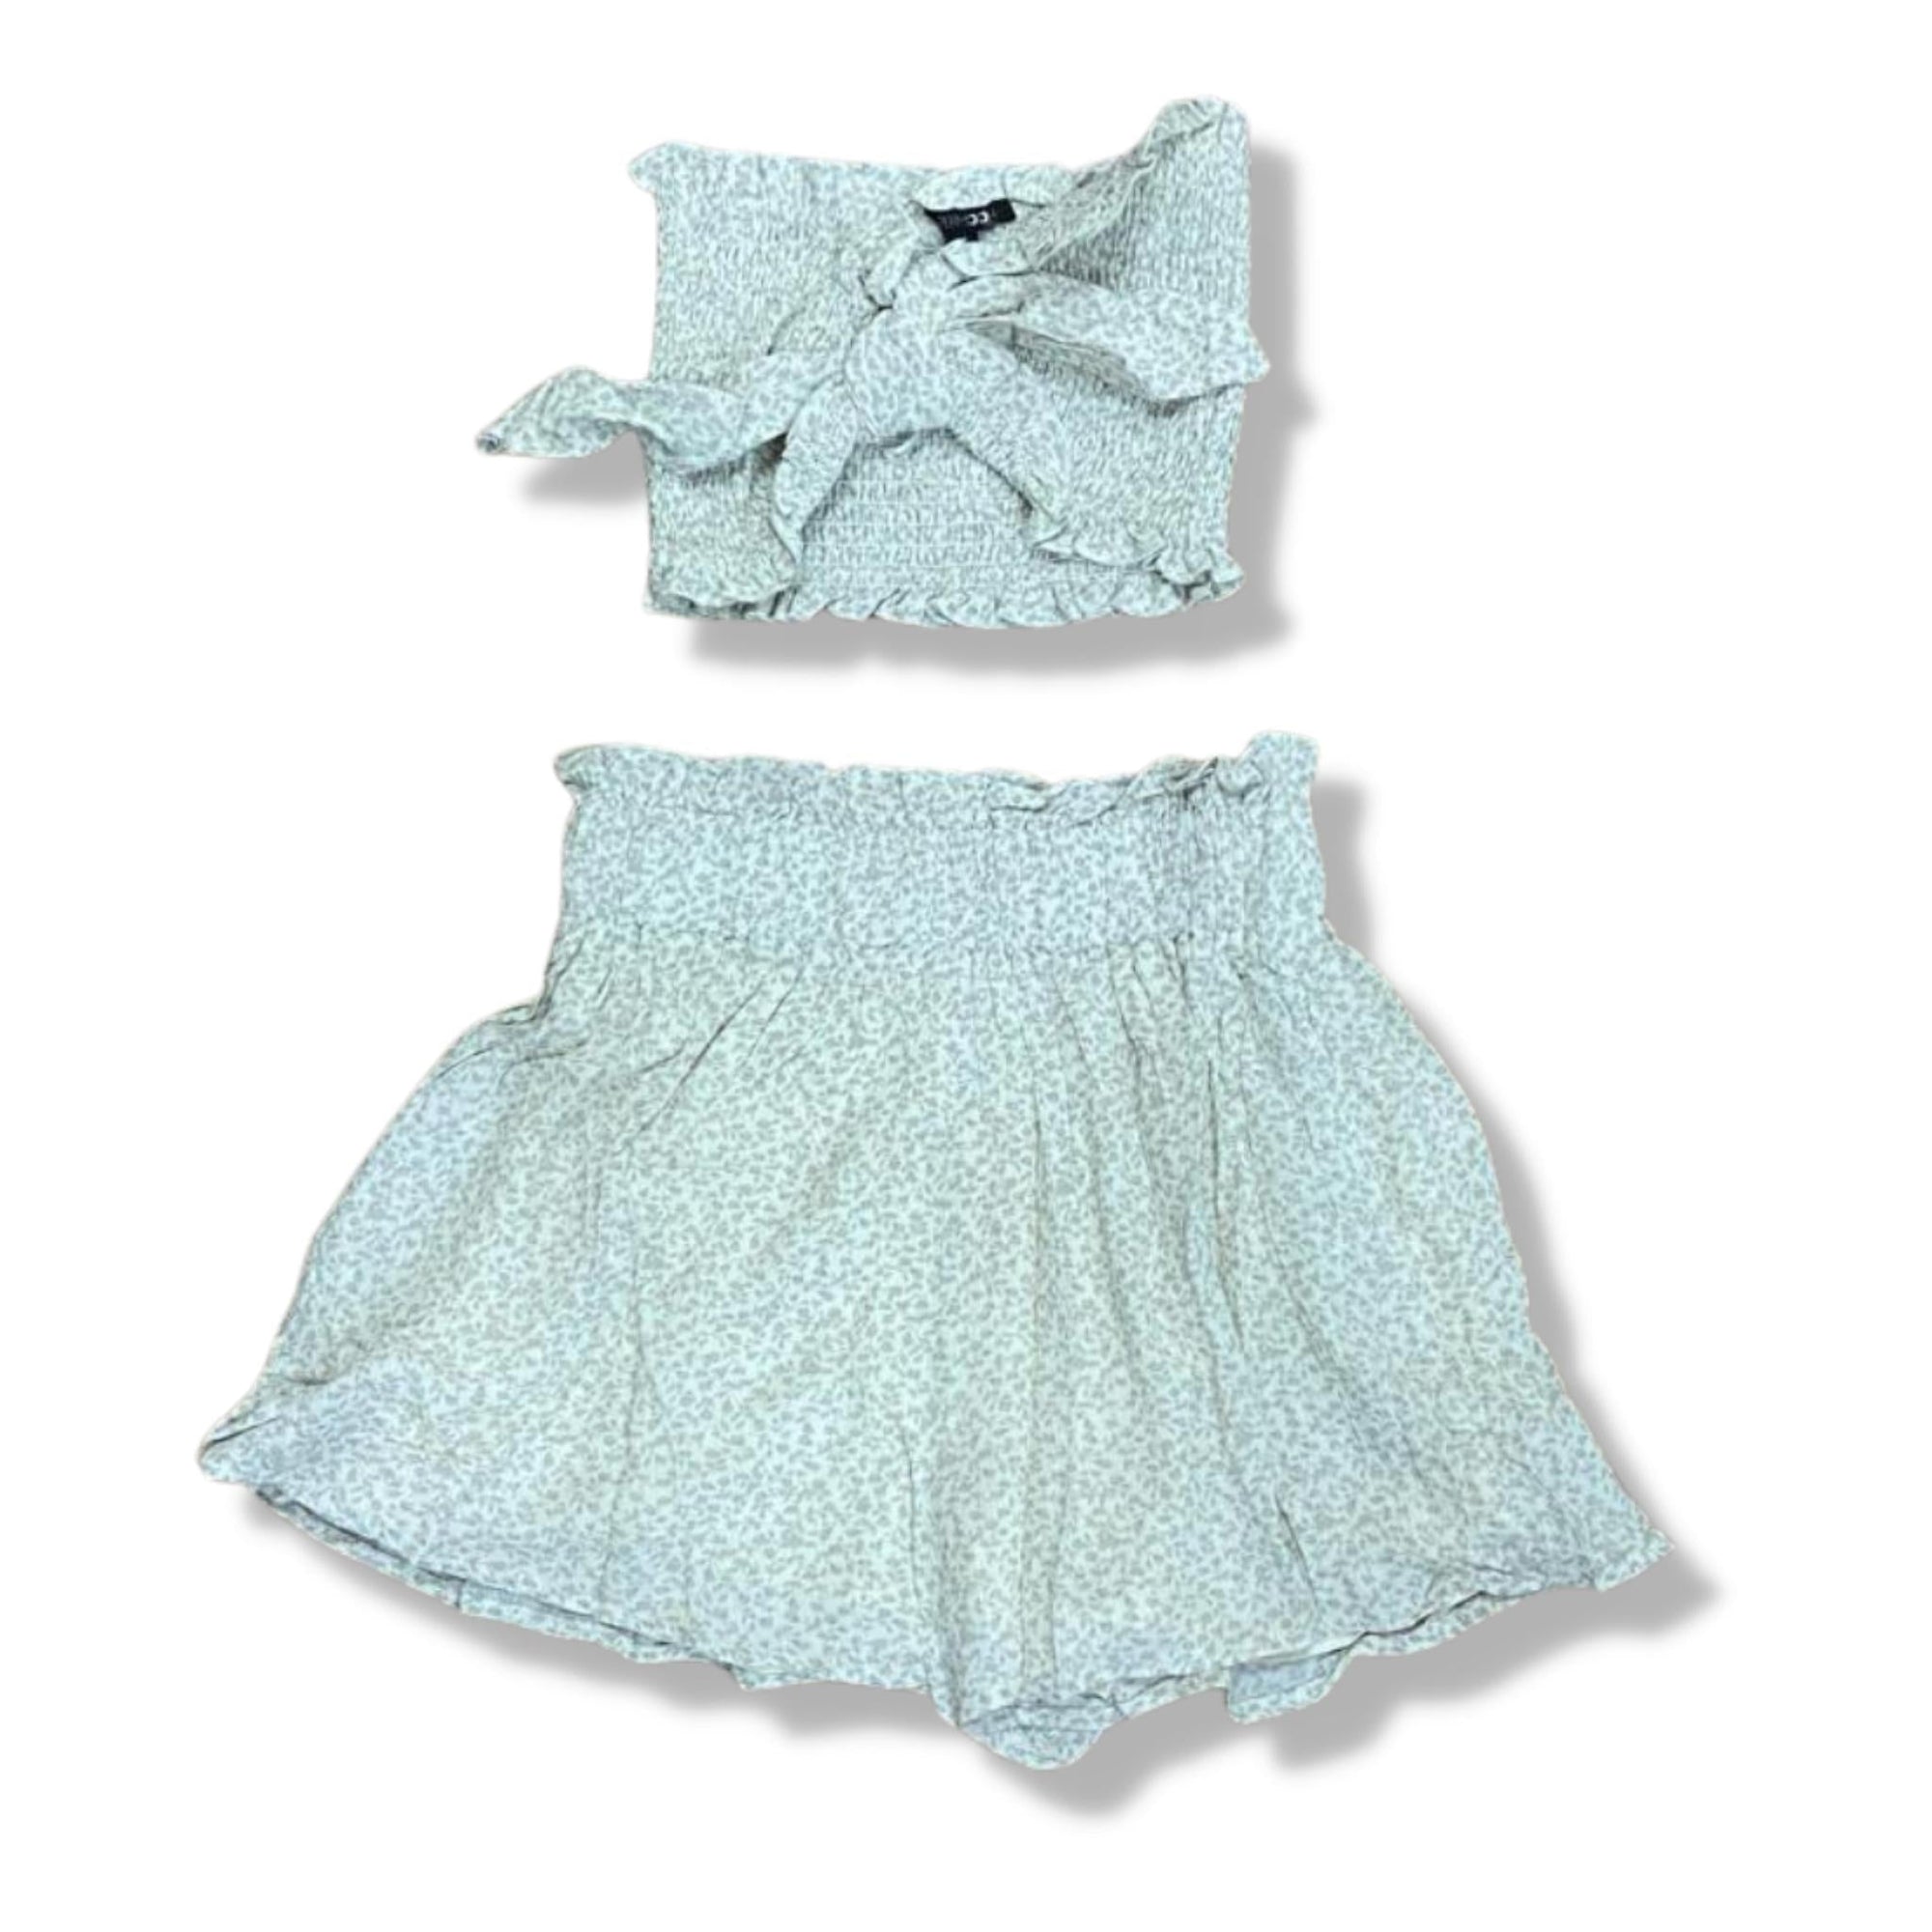 Papermoon Ivory Jennifer Smocking Top and Shorts Set - a Spirit Animal - Sets $45-$60 Papermoon rprice-45-60